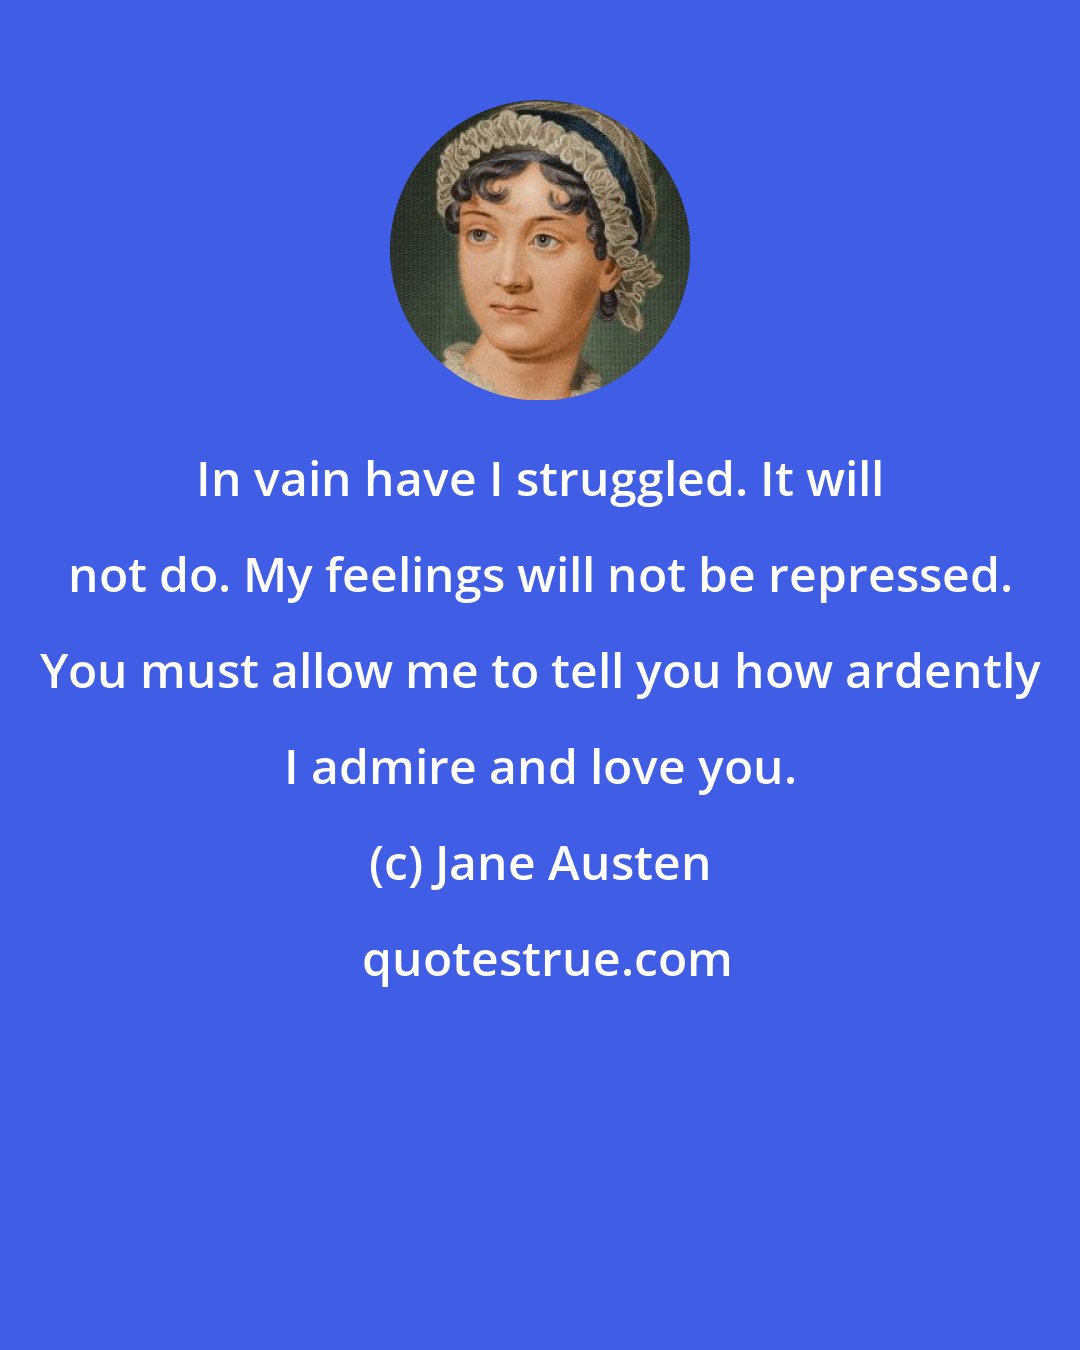 Jane Austen: In vain have I struggled. It will not do. My feelings will not be repressed. You must allow me to tell you how ardently I admire and love you.